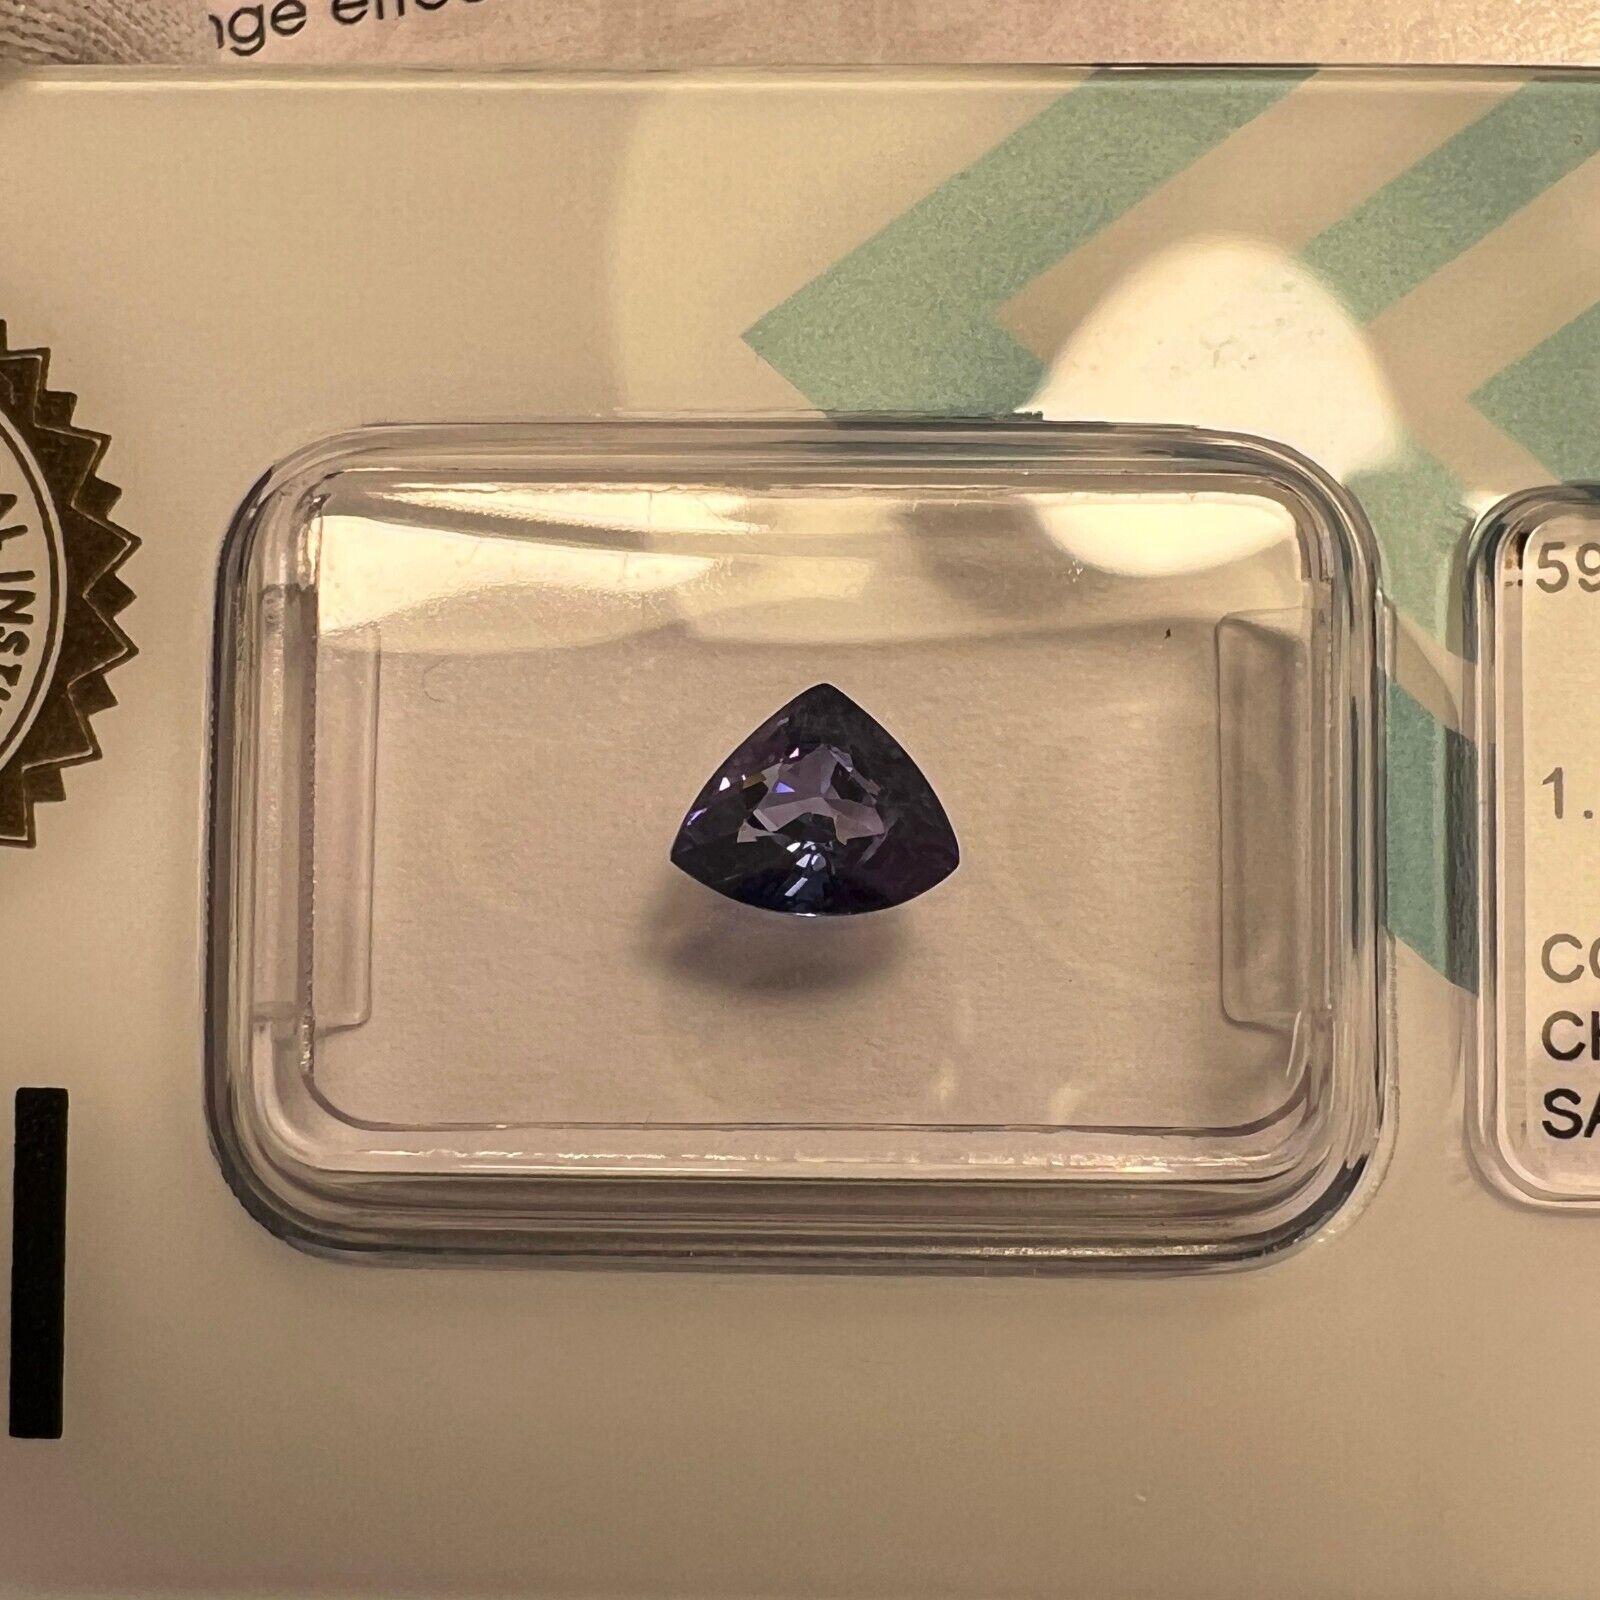 Natural 1.02ct Colour Change Sapphire Purple Blue Pink IGI Trillion Triangle Cut

Natural Rare Colour Change Sapphire Gemstone.
1.02 Carat sapphire with a rare colour change effect. Changing colour depending on the light its viewed in. Very rare for